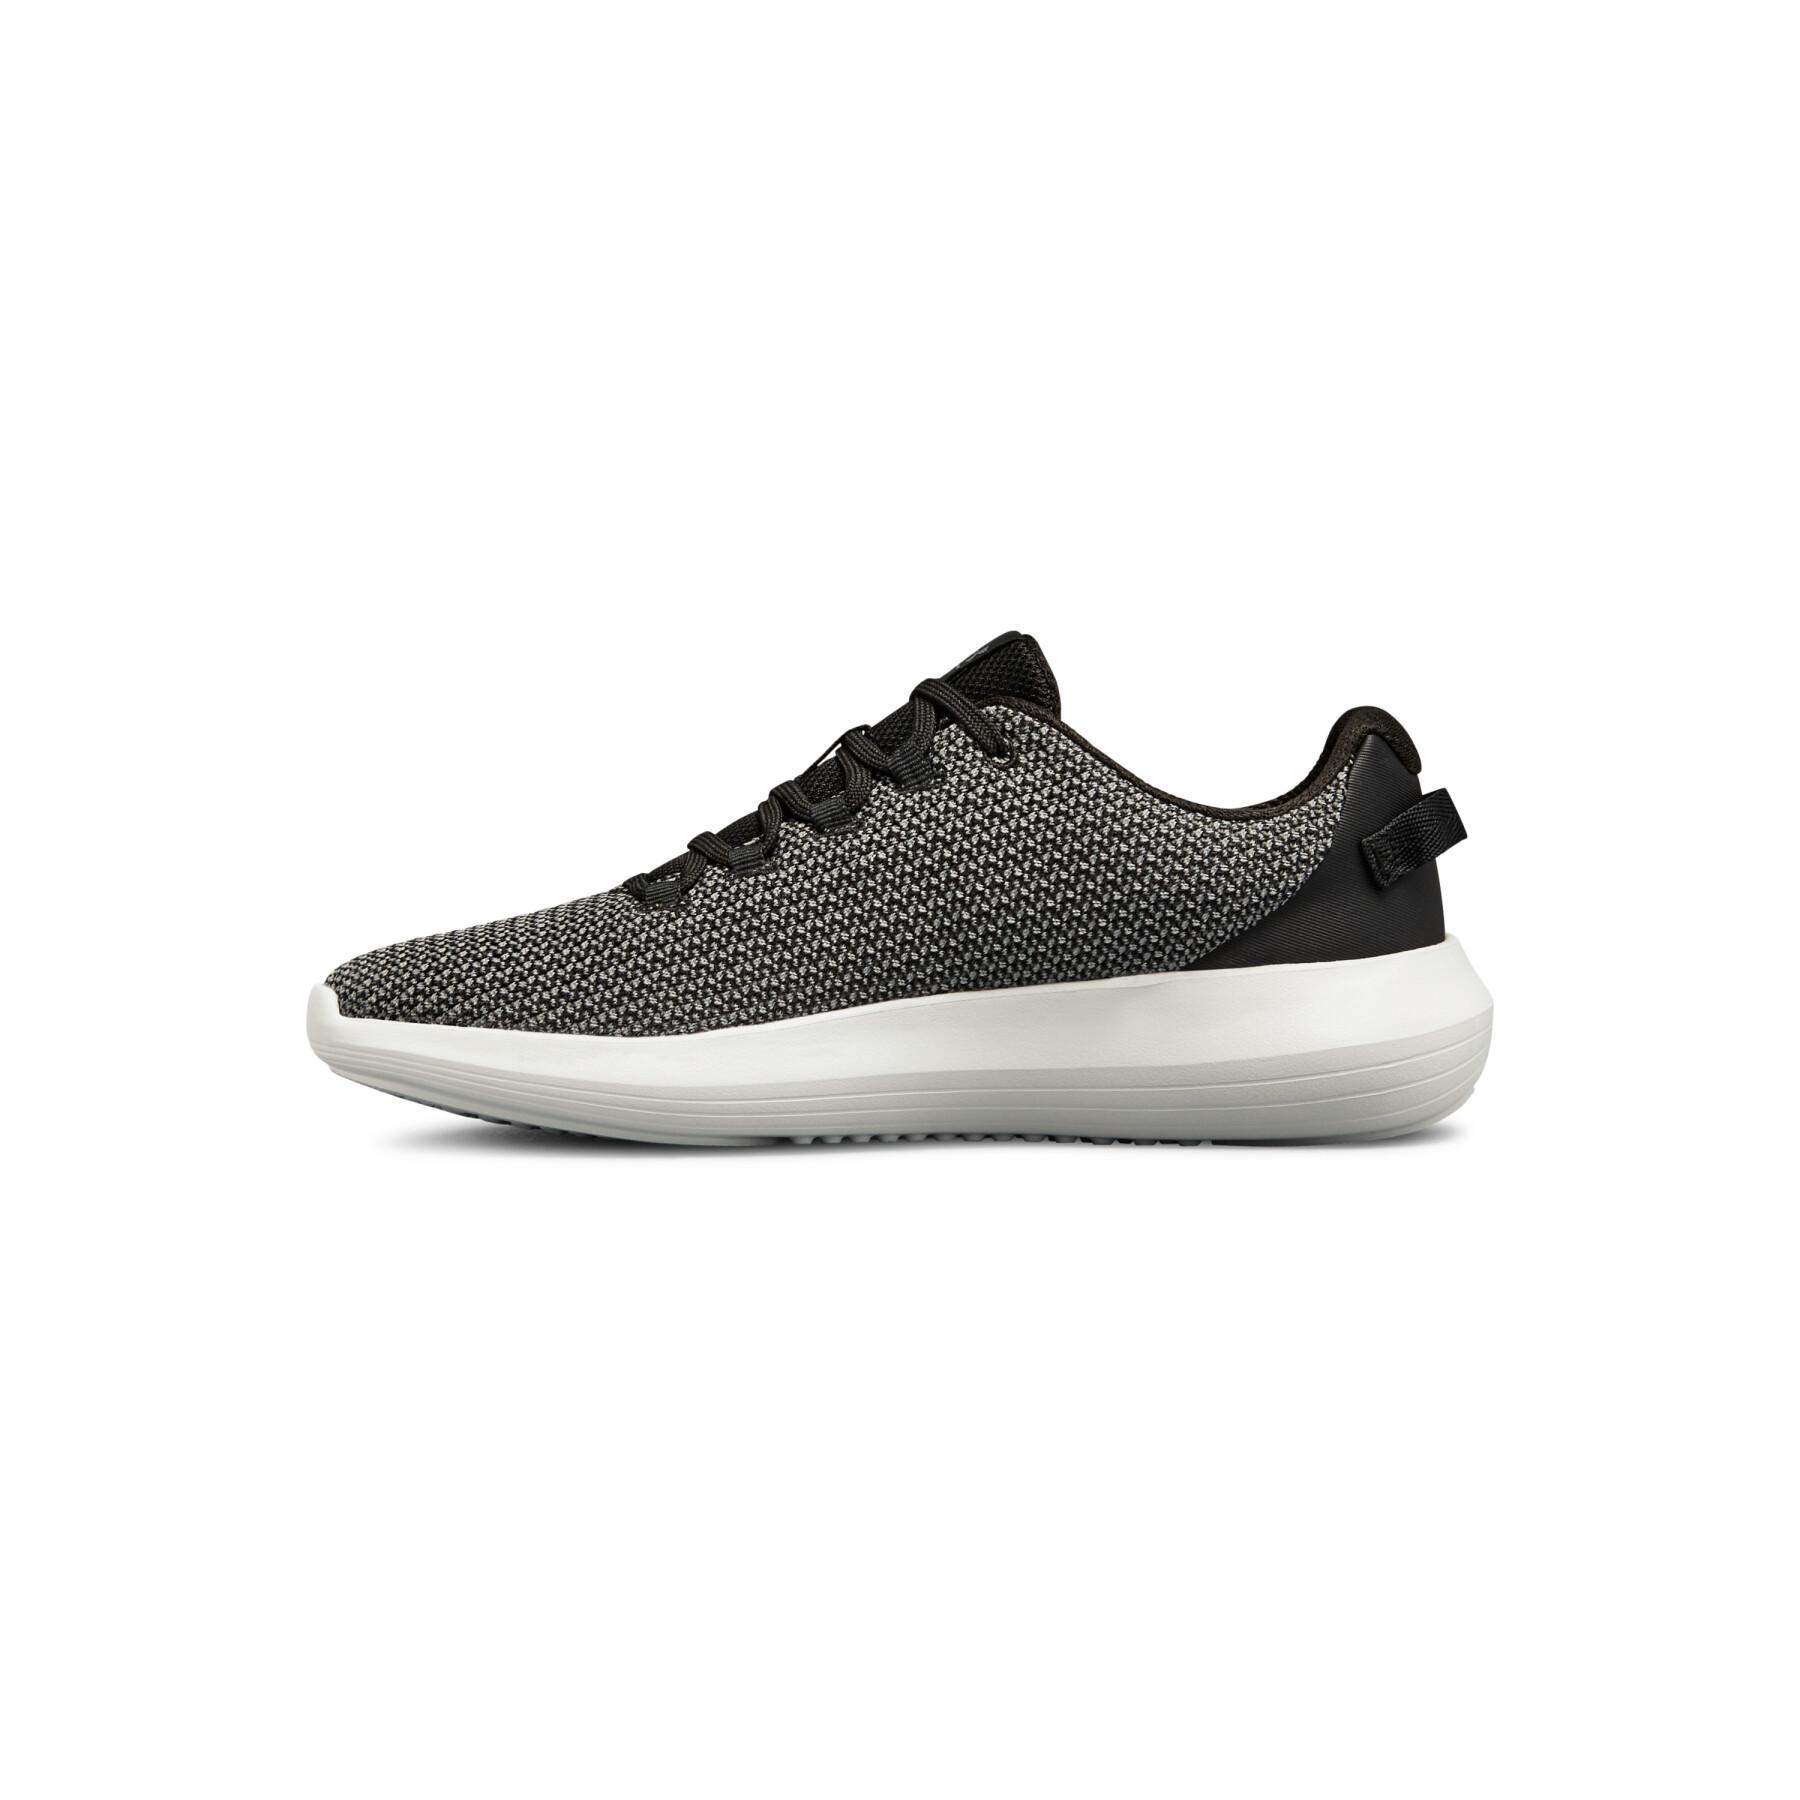 Chaussures femme Under Armour Ripple Sportstyle